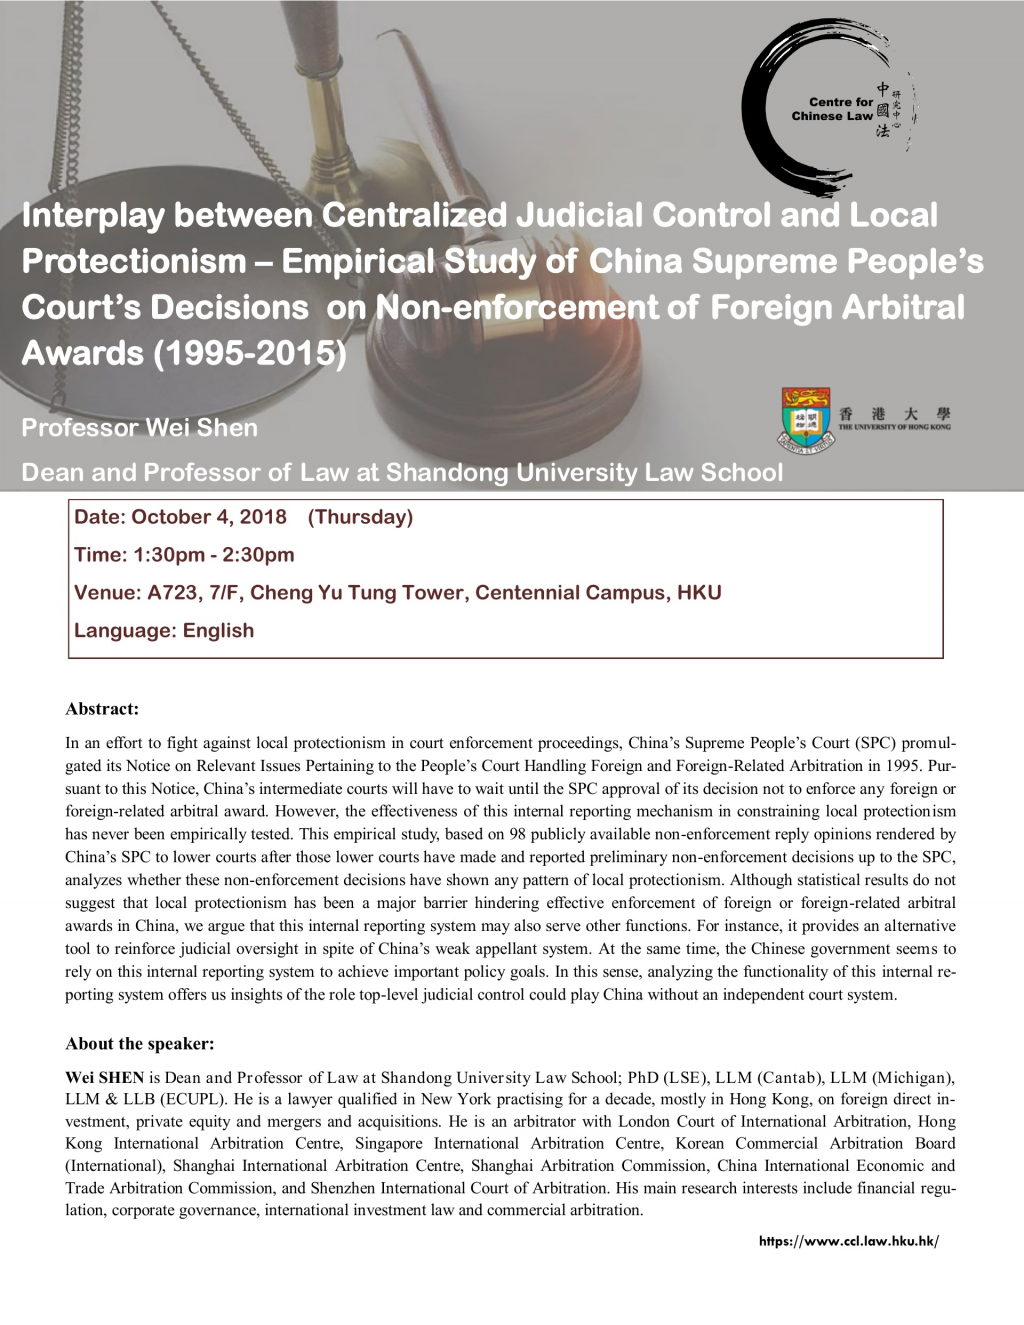 Interplay between Centralized Judicial Control and Local Protectionism